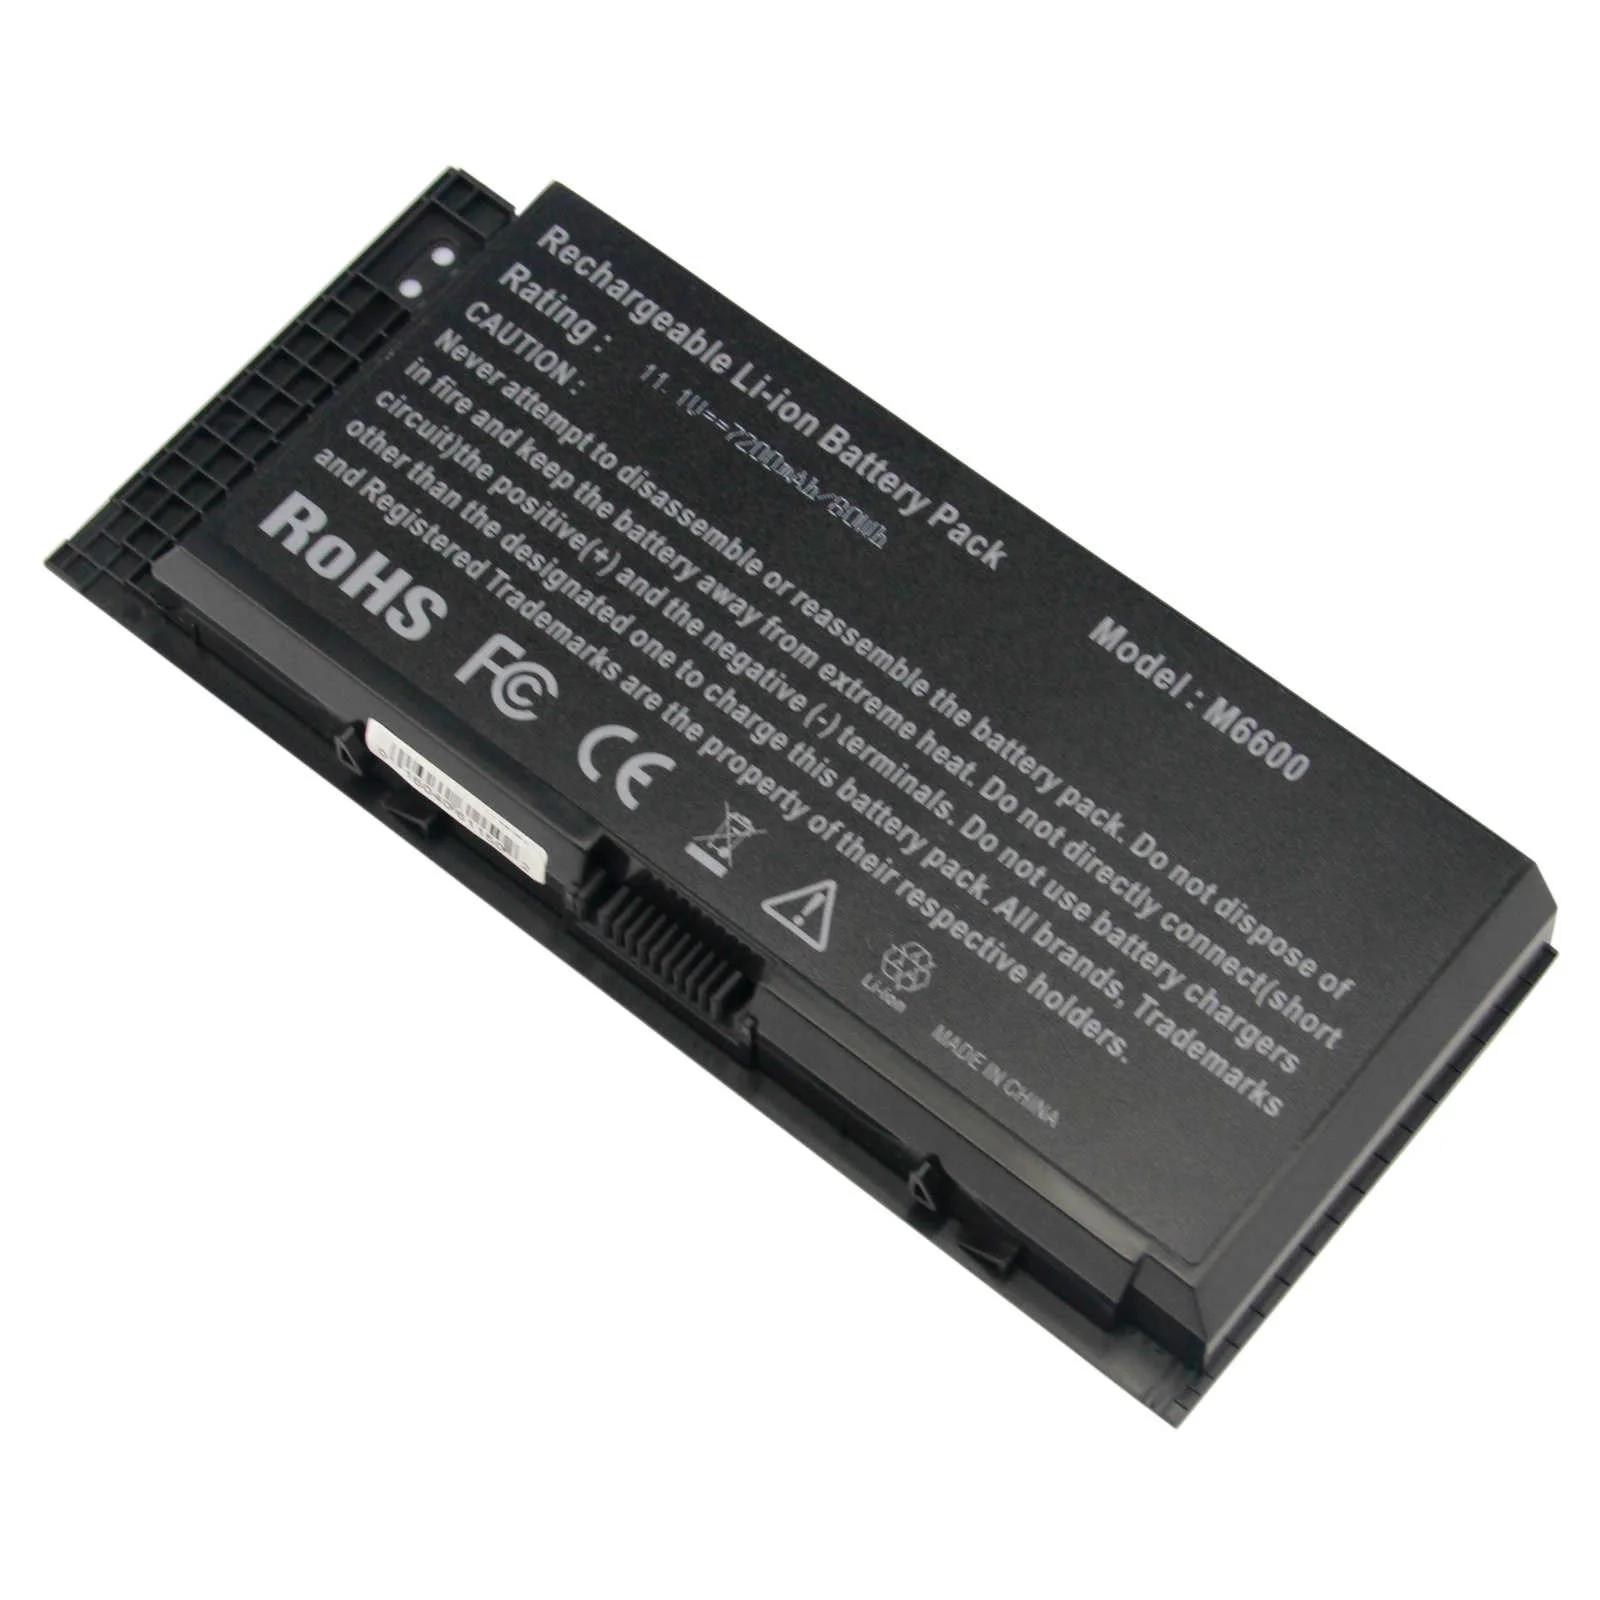 9 cell rechargeable laptop battery for Dell Precision M6600 M4700 Compatible battery model 0TN1K5 312 1176 312 1177 312 1178 (1600111557804)